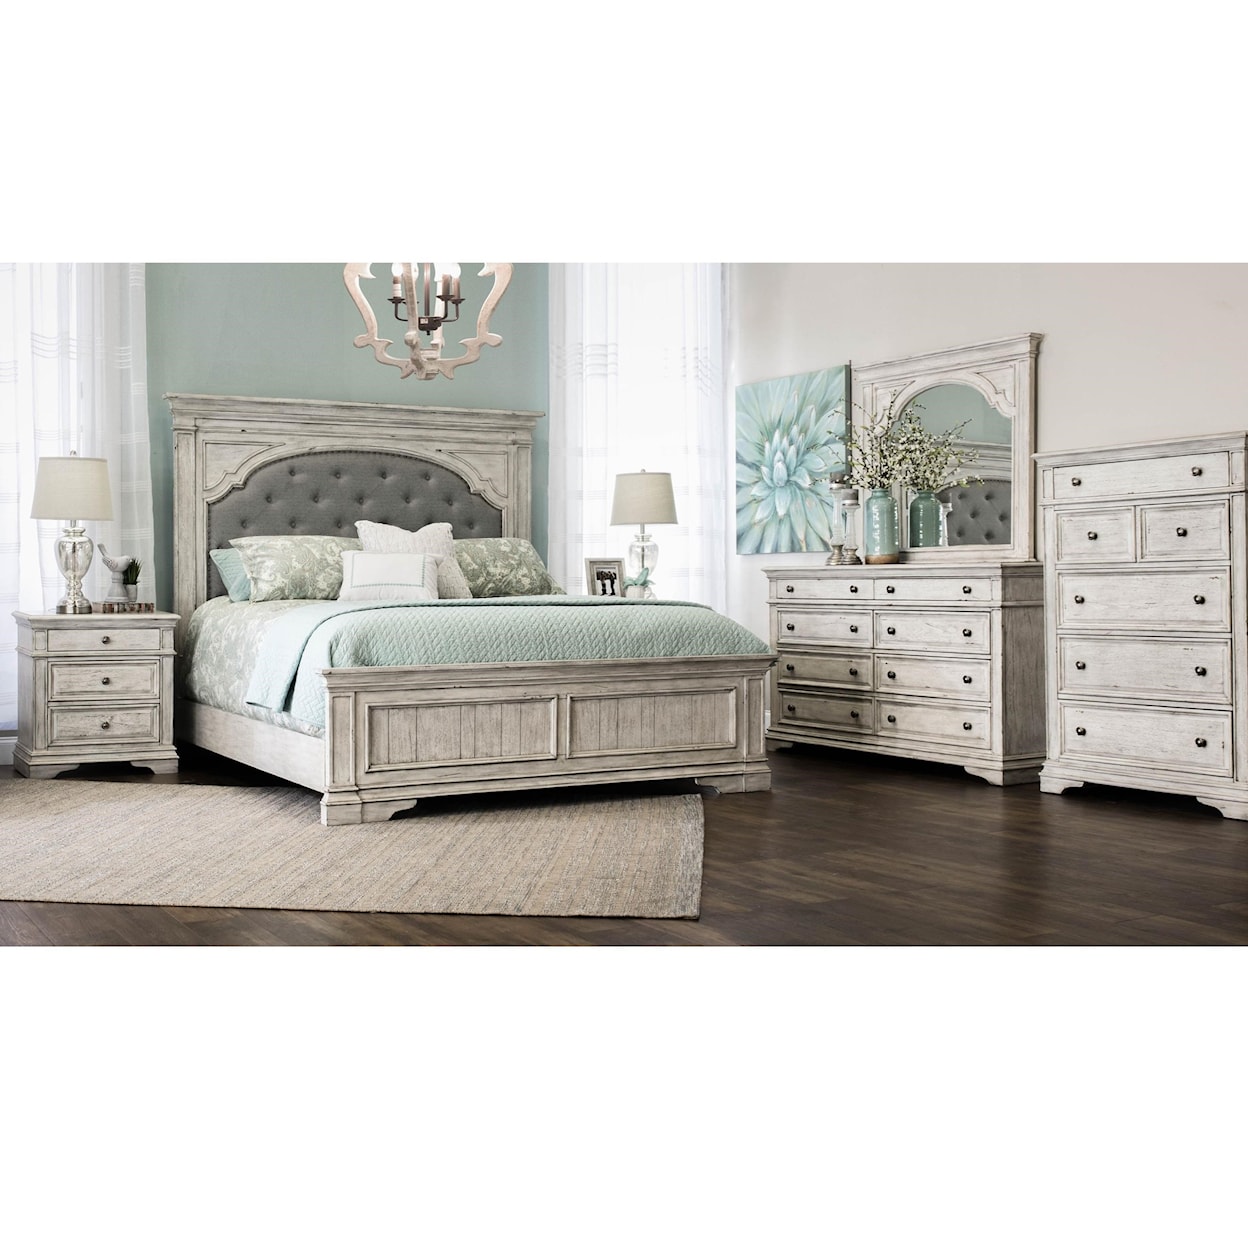 Steve Silver High Point HIGH POINT WHITE KING BED |